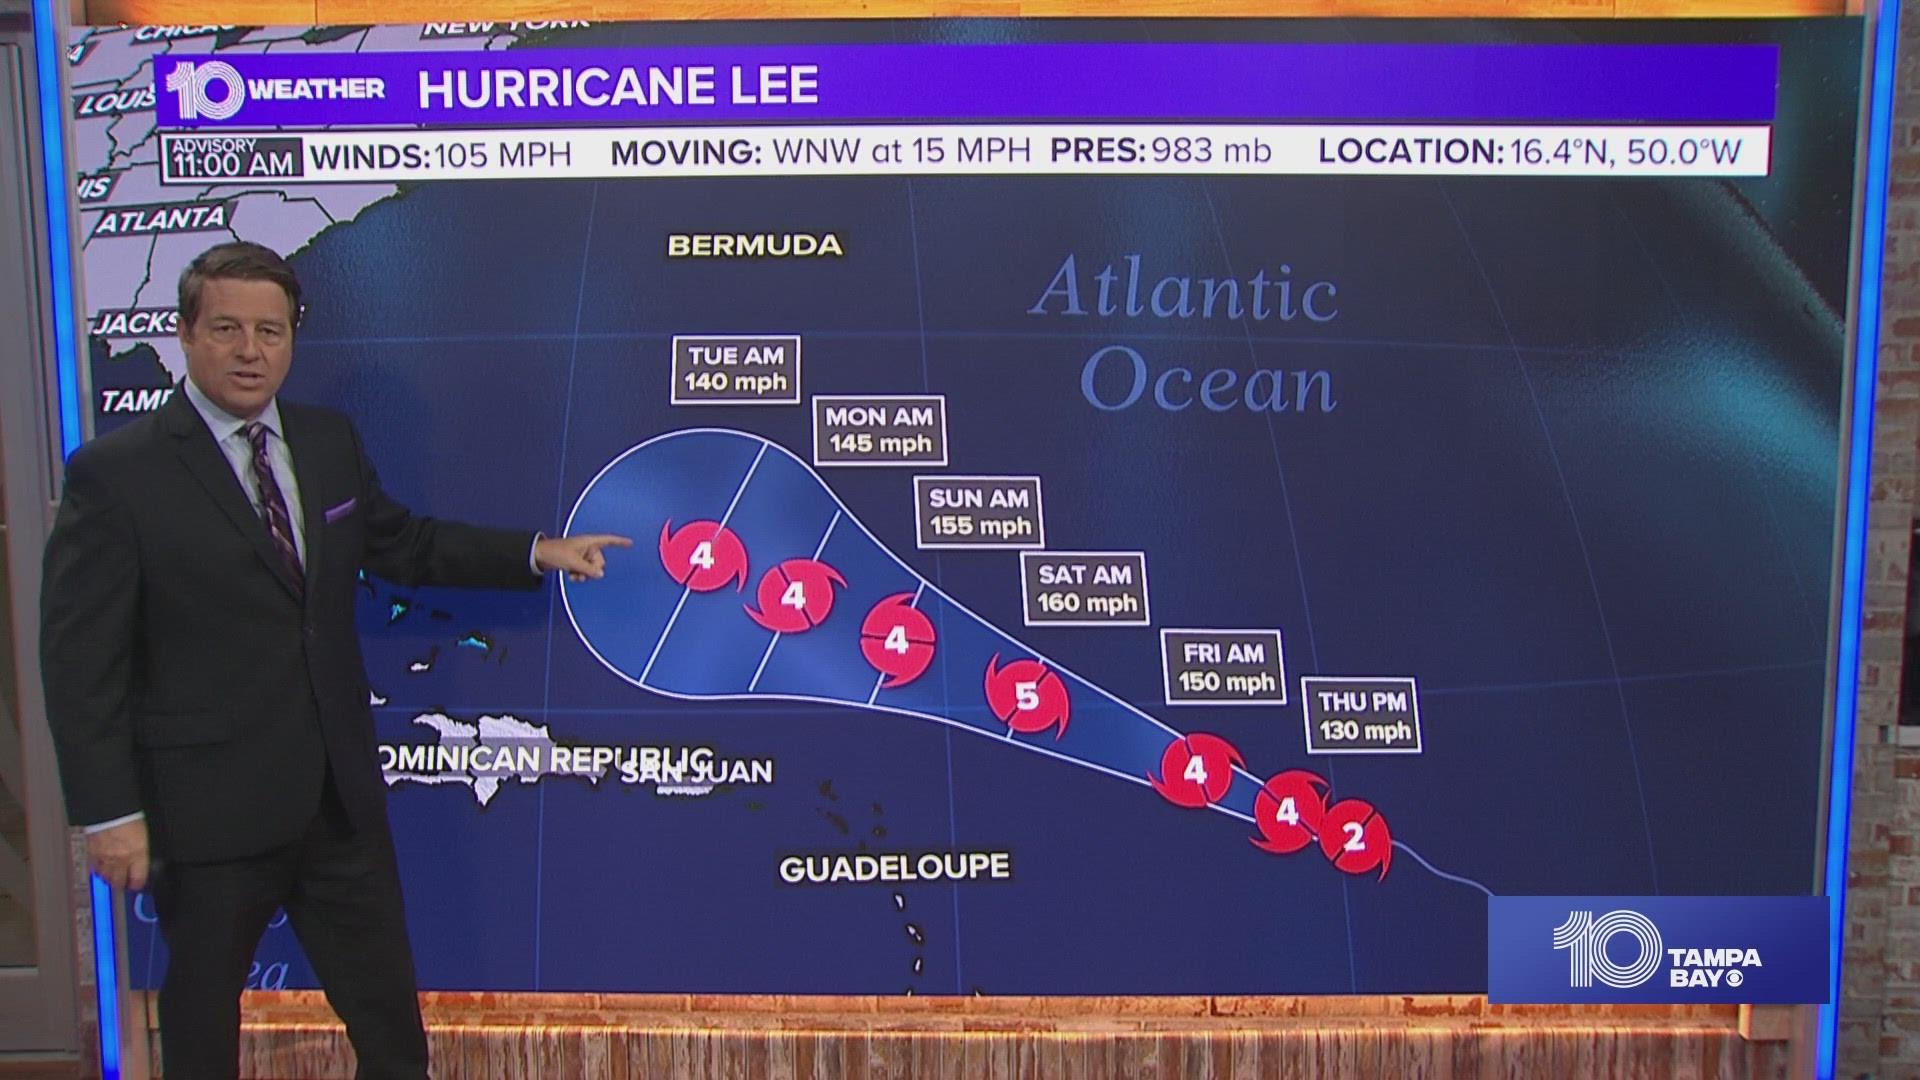 Chief meteorologist Bobby Deskins explains the National Hurricane Center's "cone of uncertainty" and what it means for Hurricane Lee.